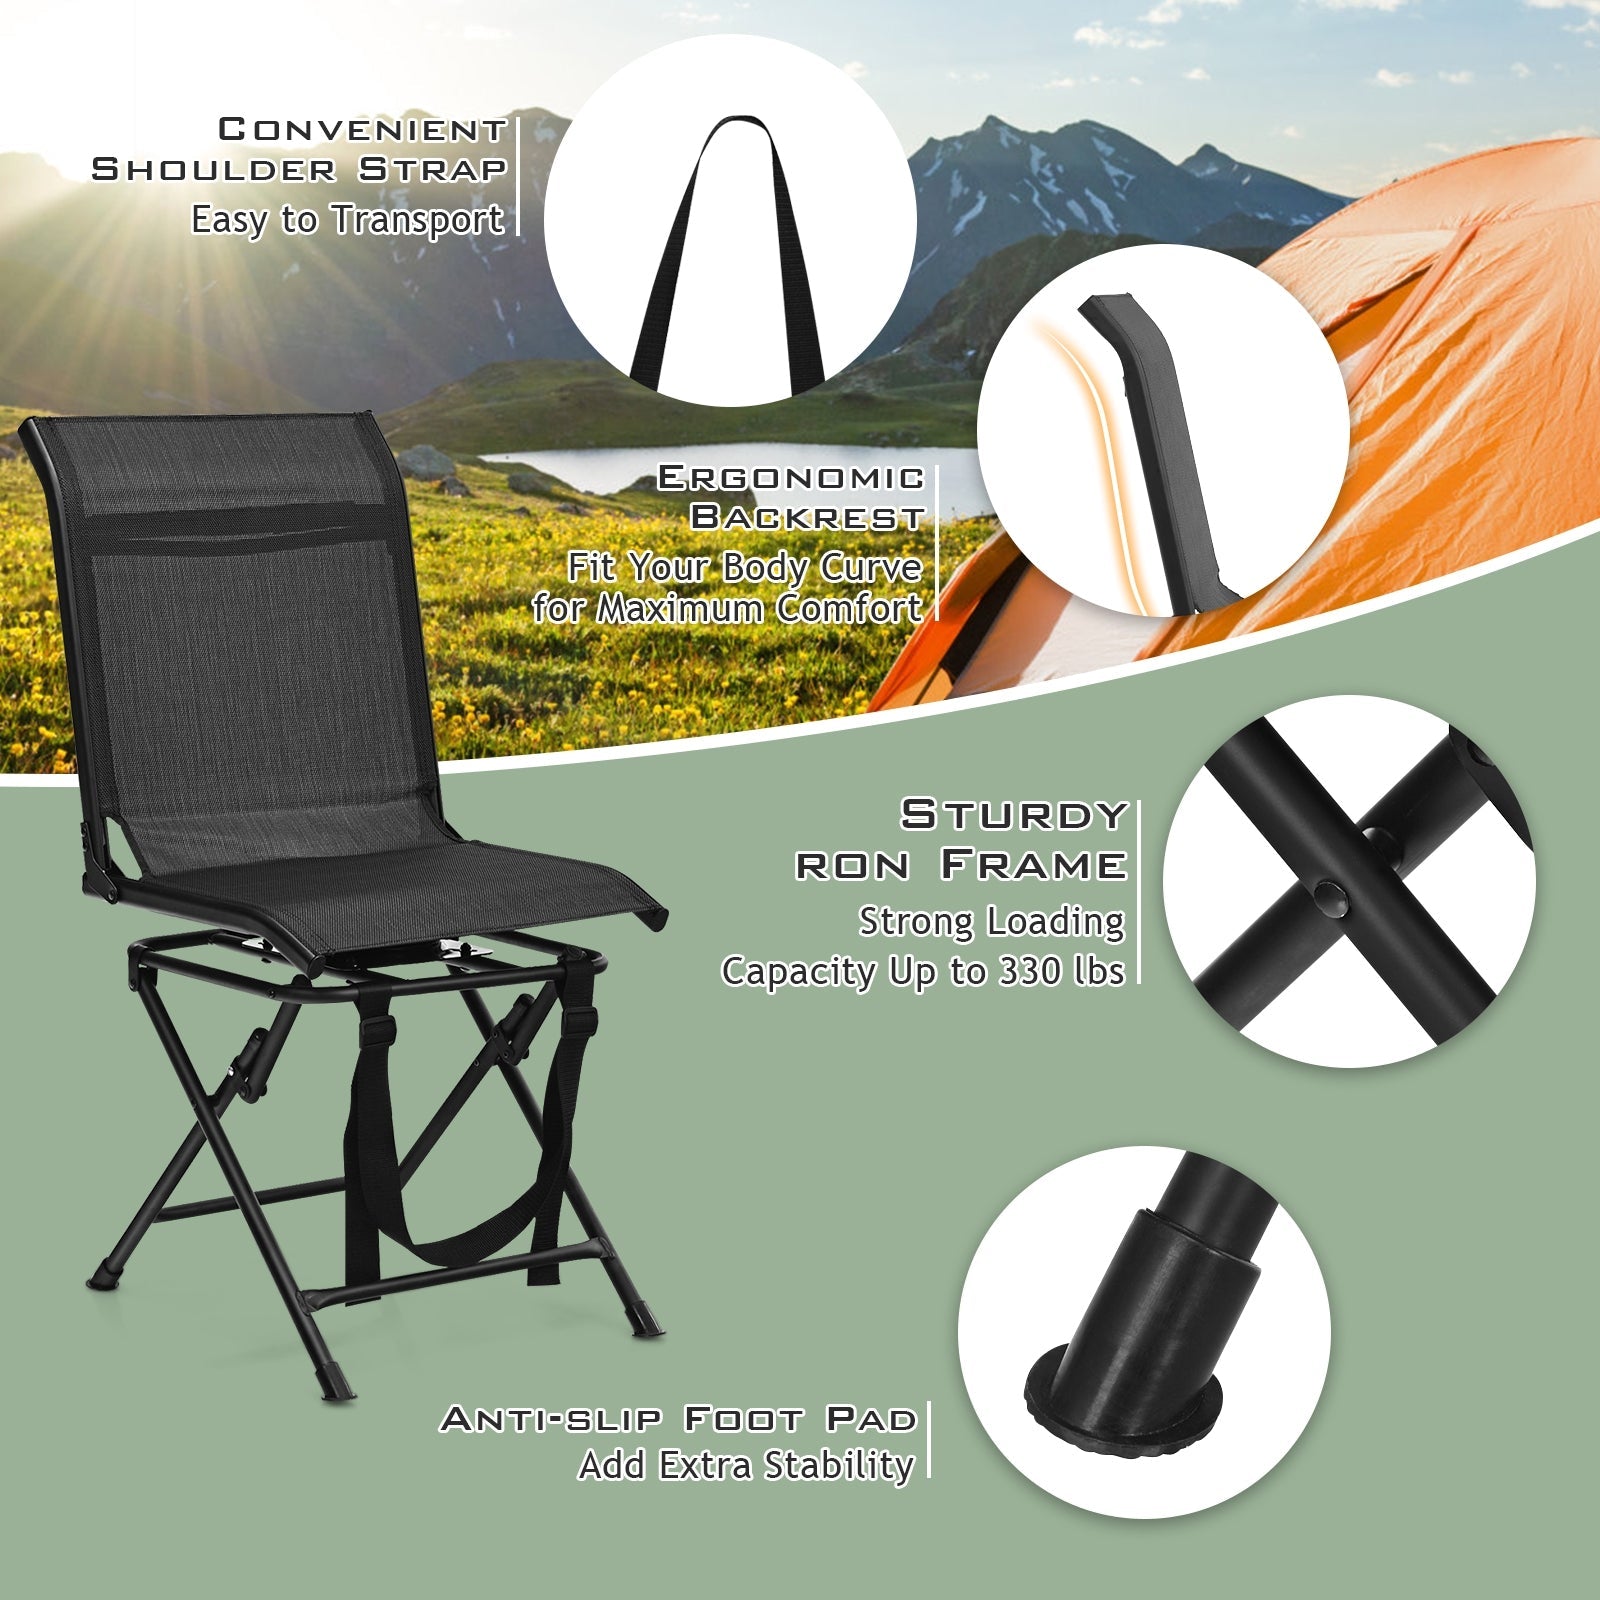 360-degree Swivel Foldable Camping Chair for All-weather Outdoor